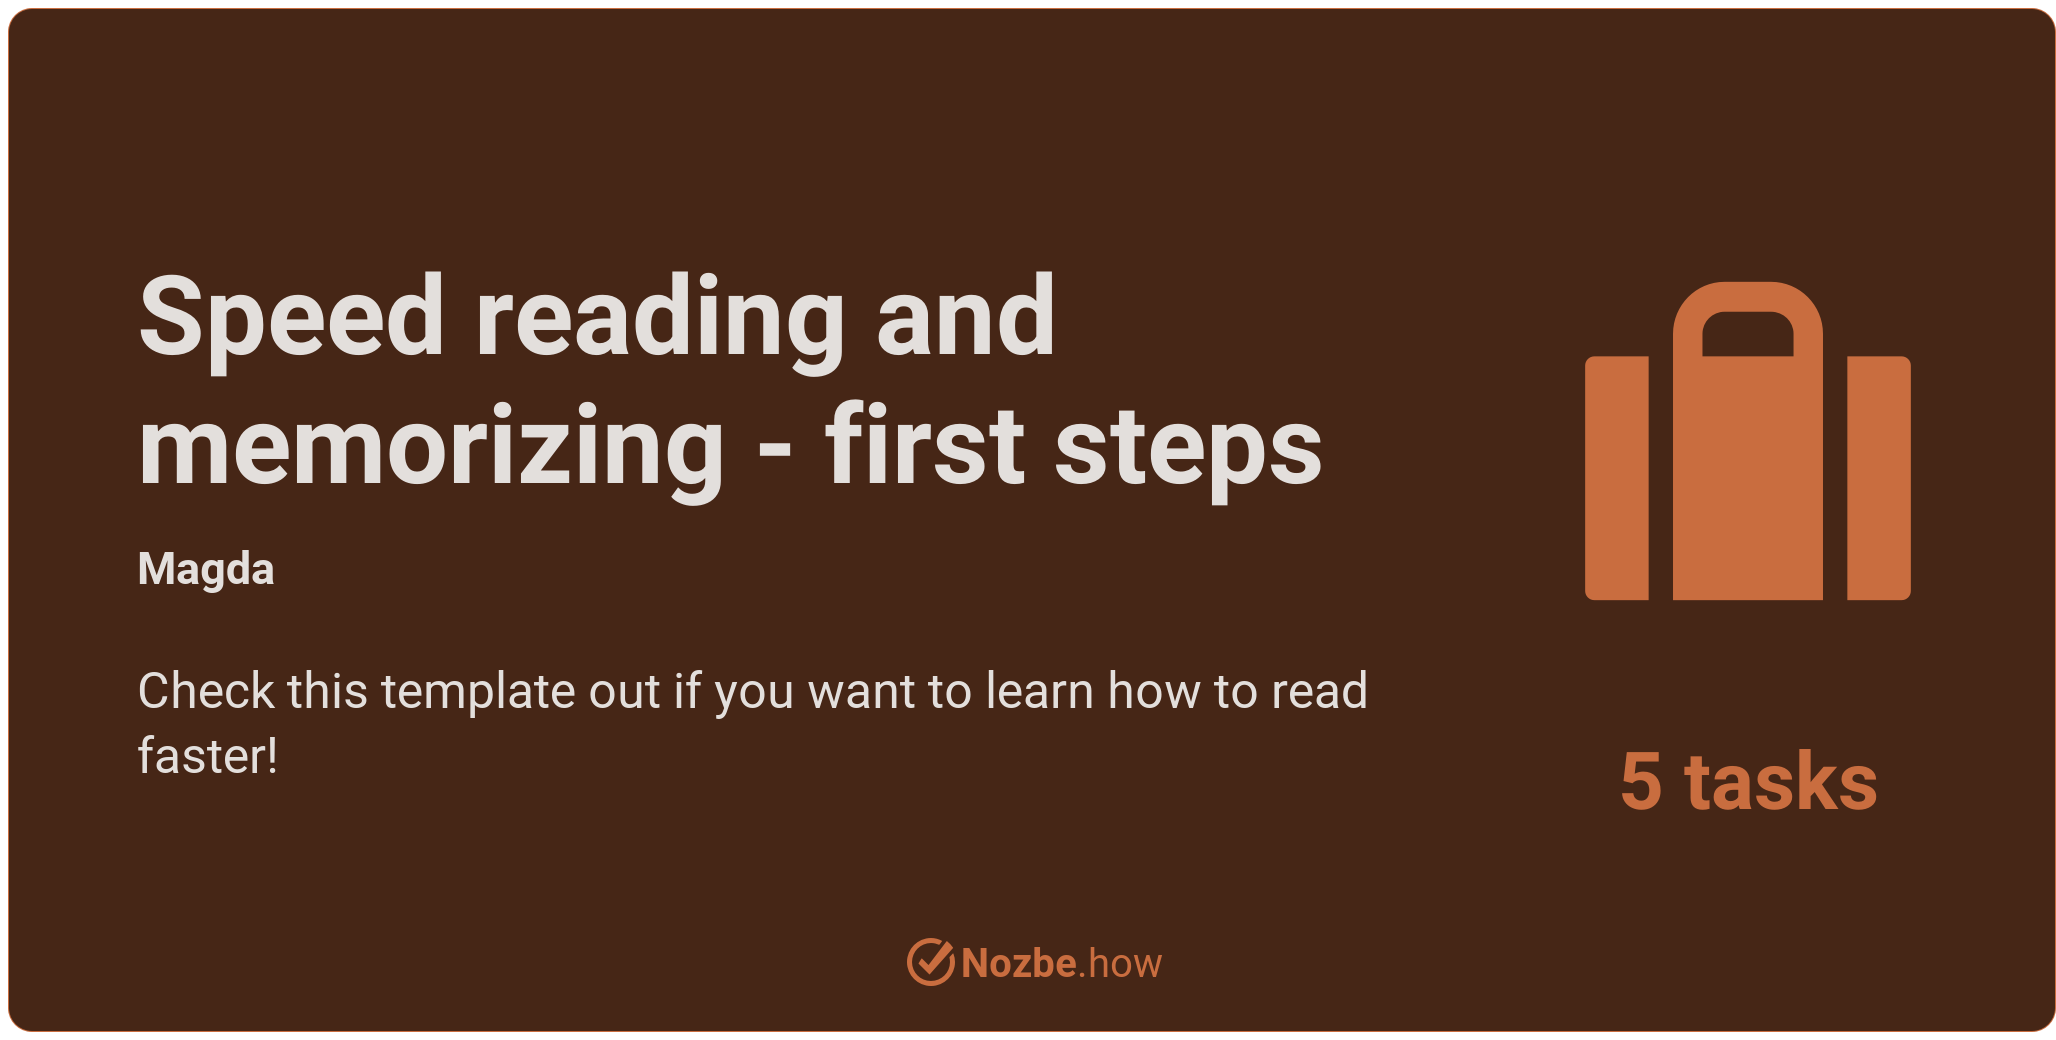 Speed reading and memorizing - first steps